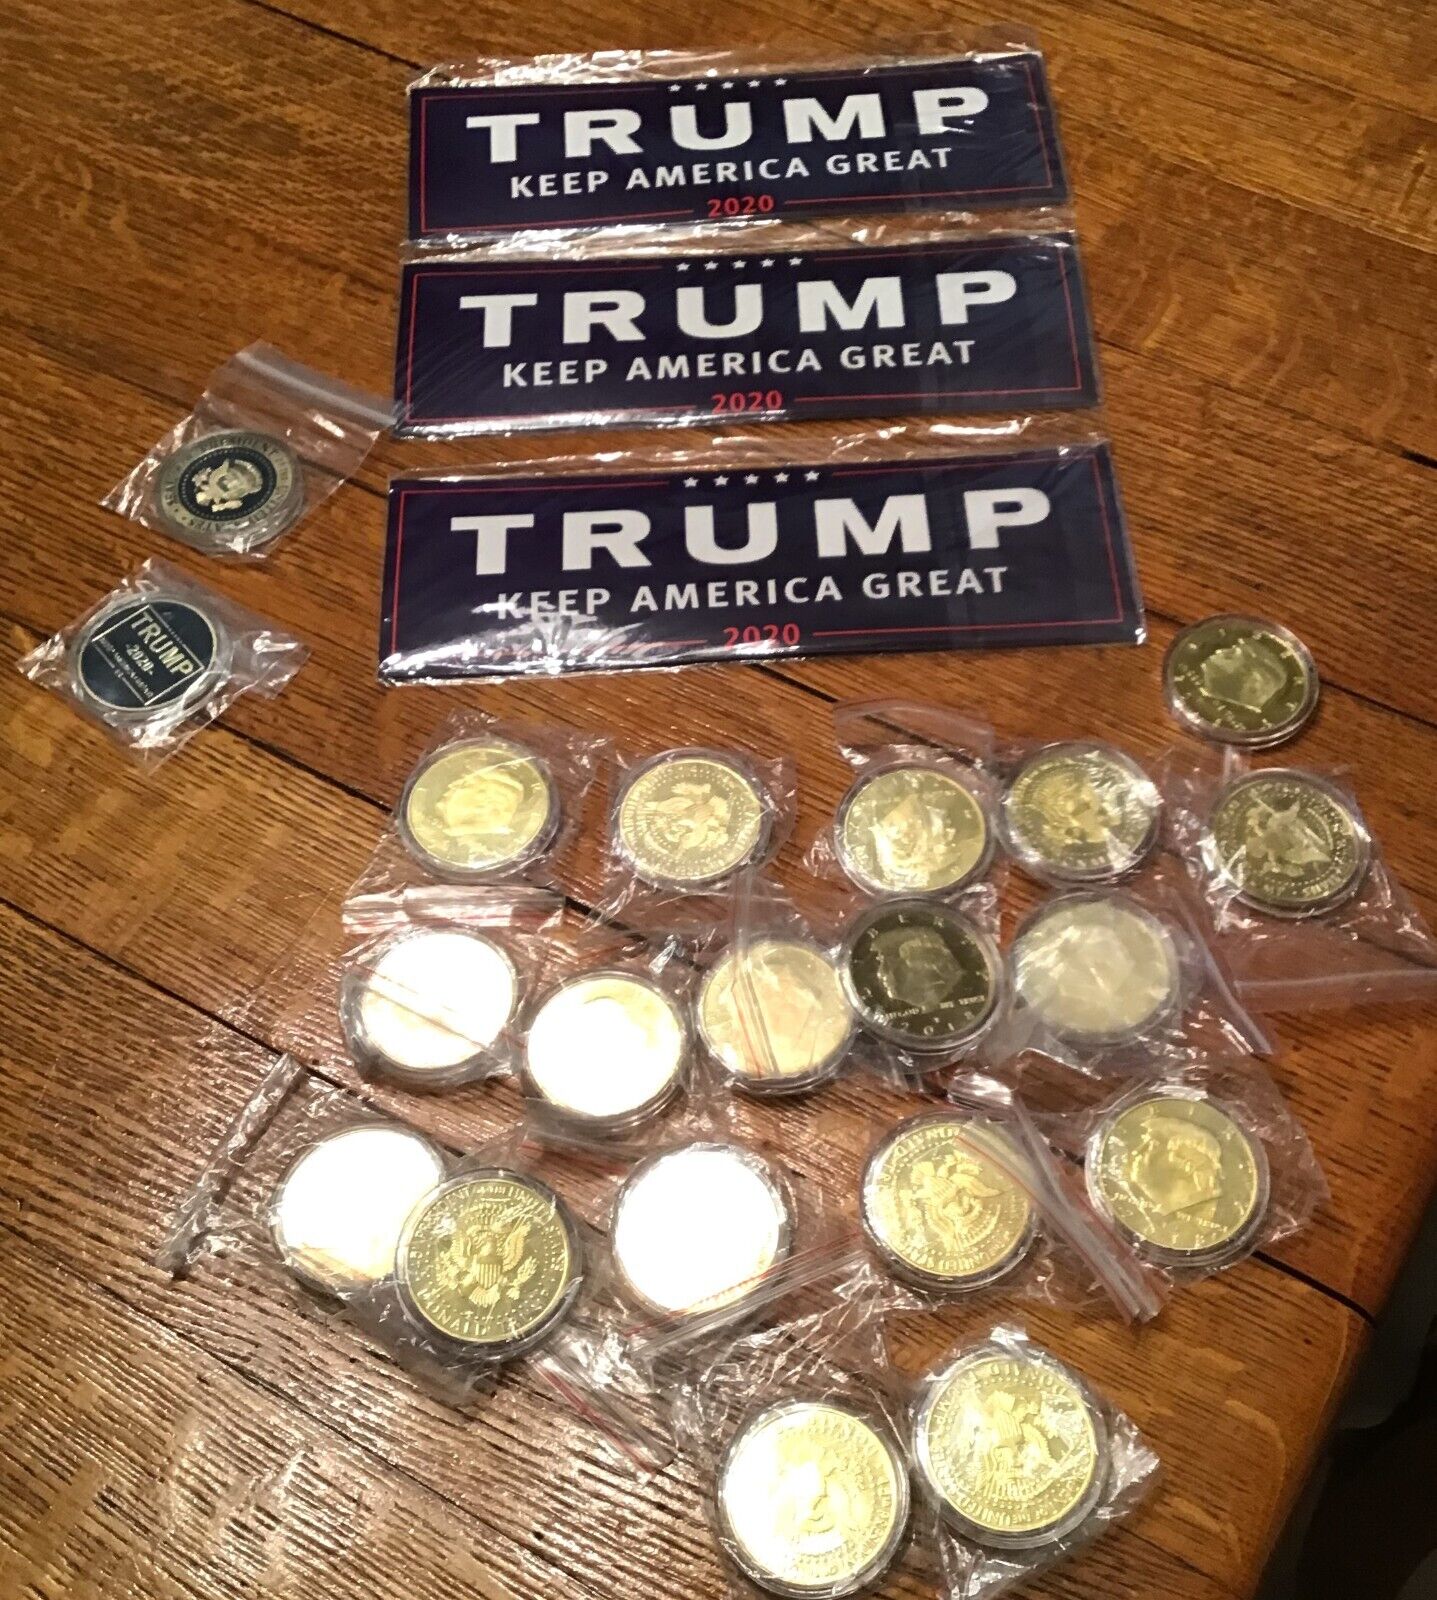 HUGE Lot of Trump Coins and Bumper Stickers All are NEW